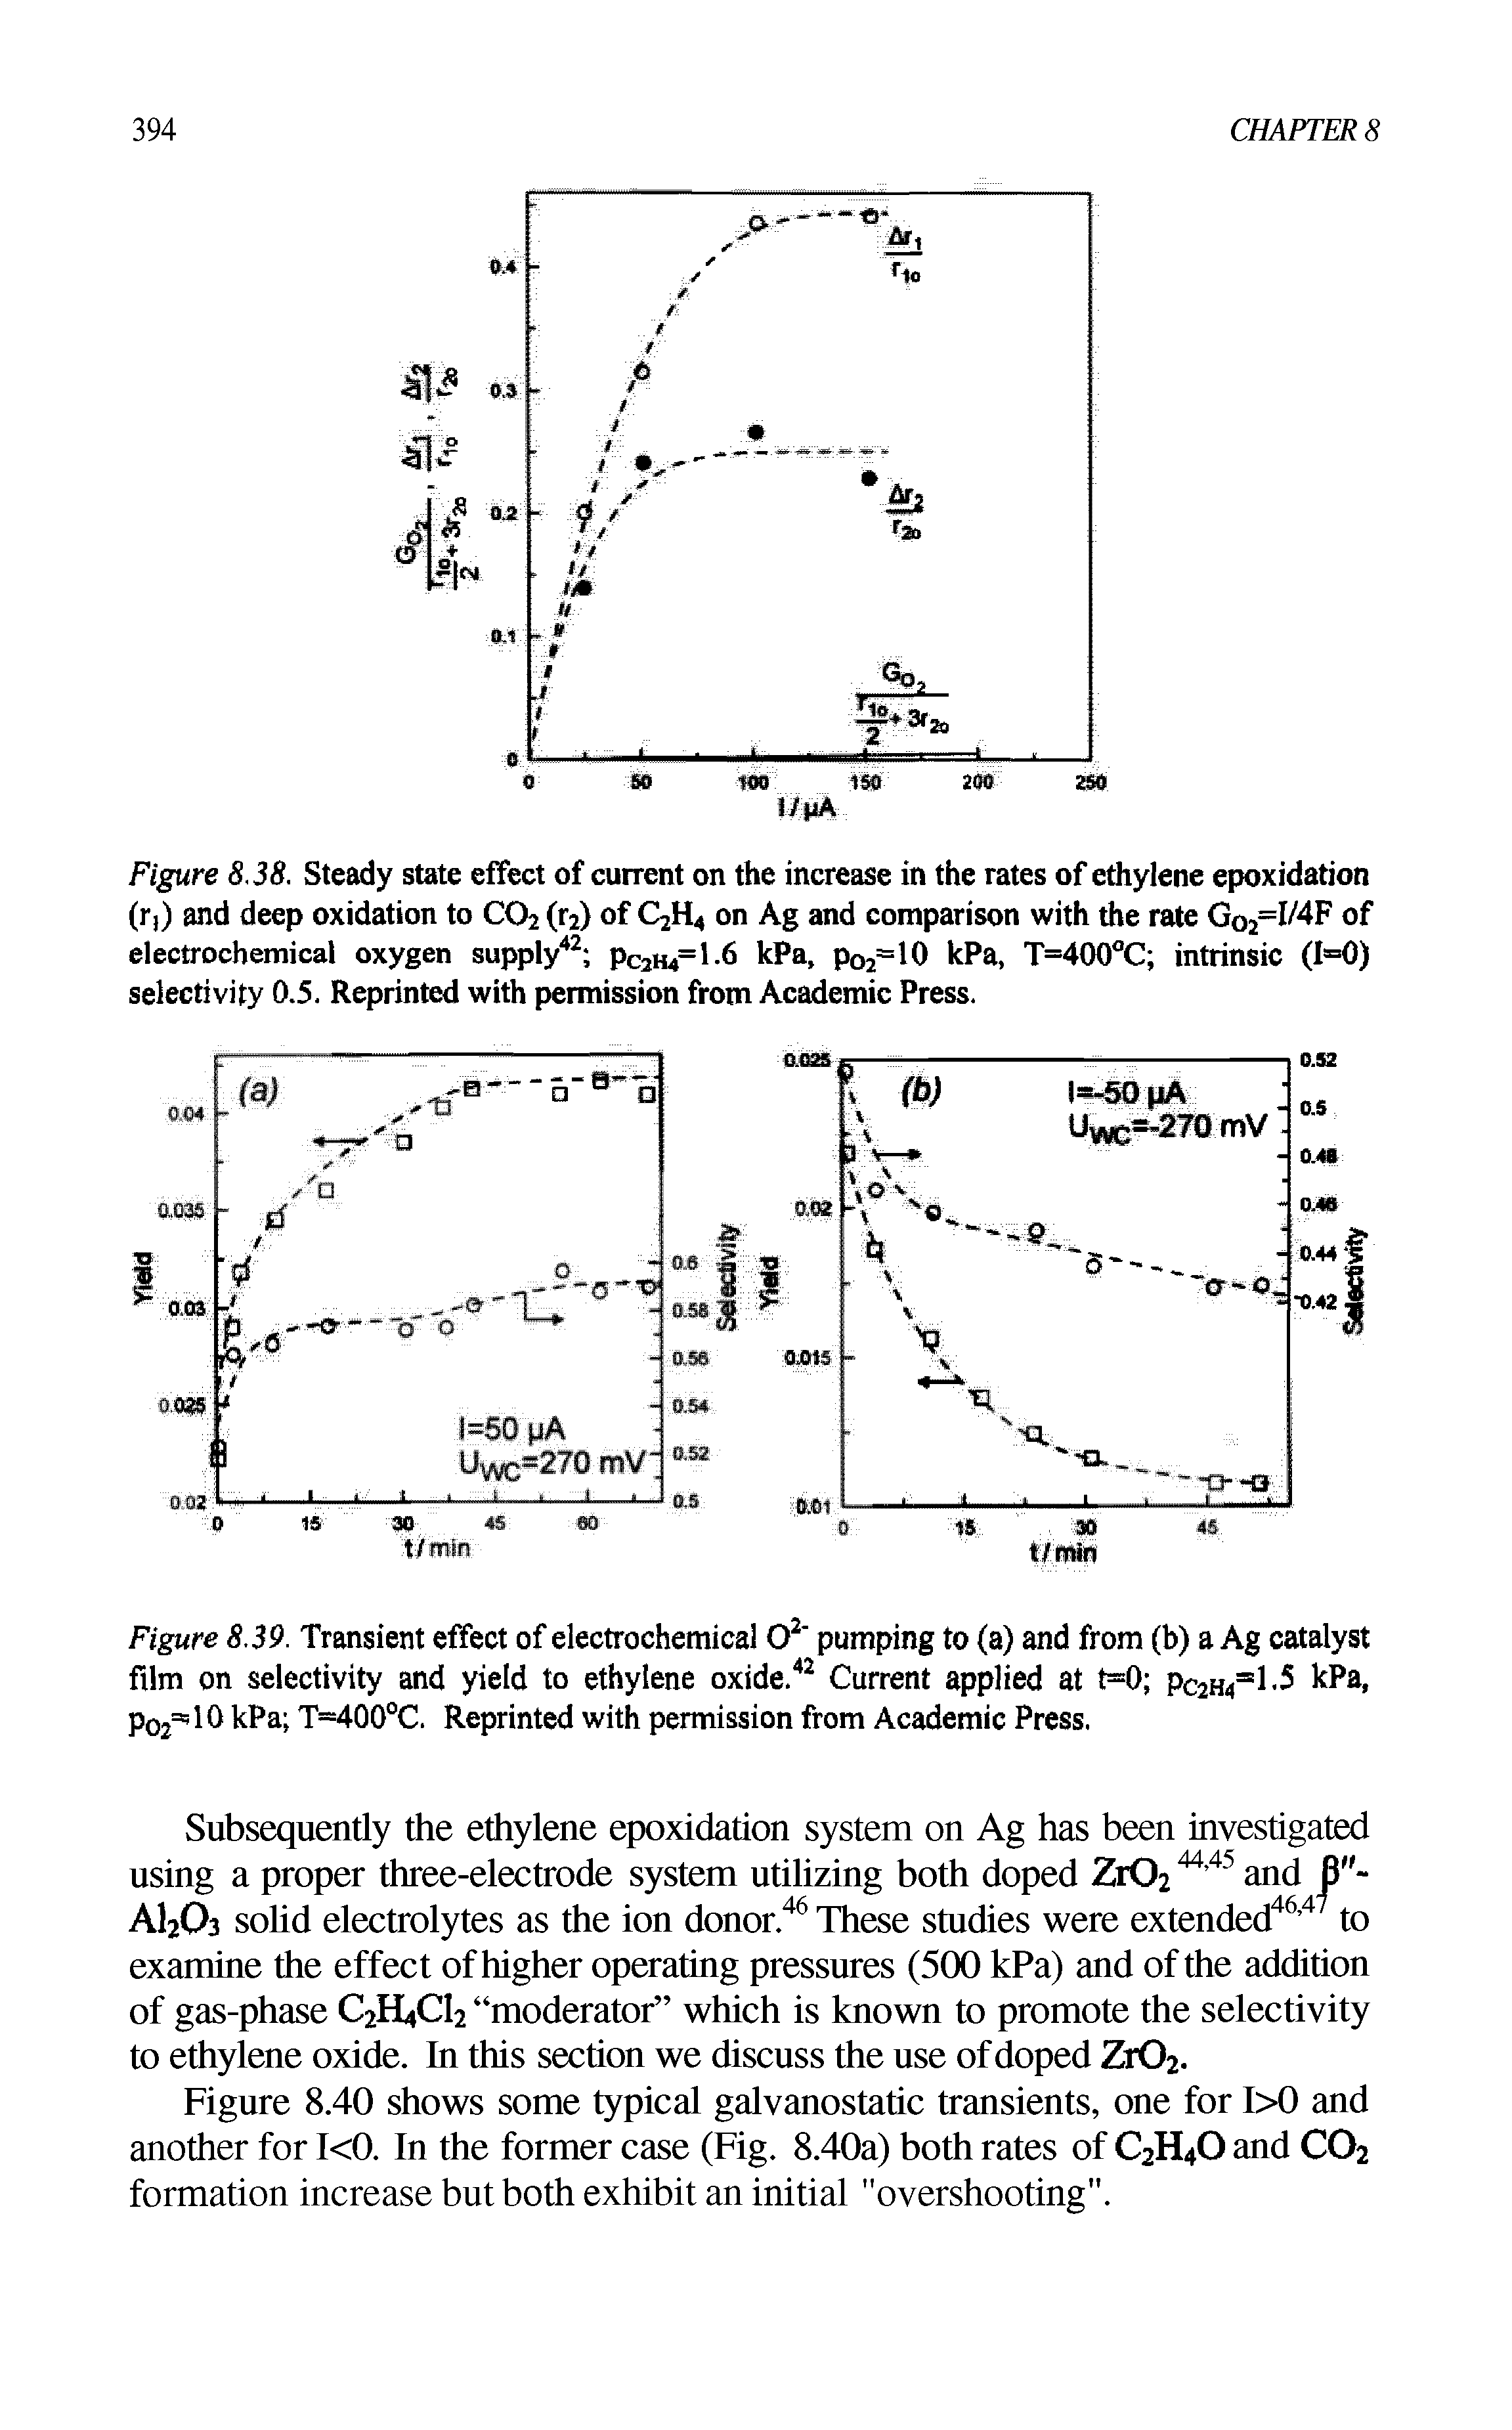 Figure 8.38. Steady state effect of current on the increase in the rates of ethylene epoxidation (rj) and deep oxidation to CO2 (r2) of C2H4 on Ag and comparison with the rate Go2=I/4F of electrochemical oxygen supply42 pC2H4=l-6 kPa, pO2=10 kPa, T=400°C intrinsic (1=0) selectivity 0.5, Reprinted with permission from Academic Press.